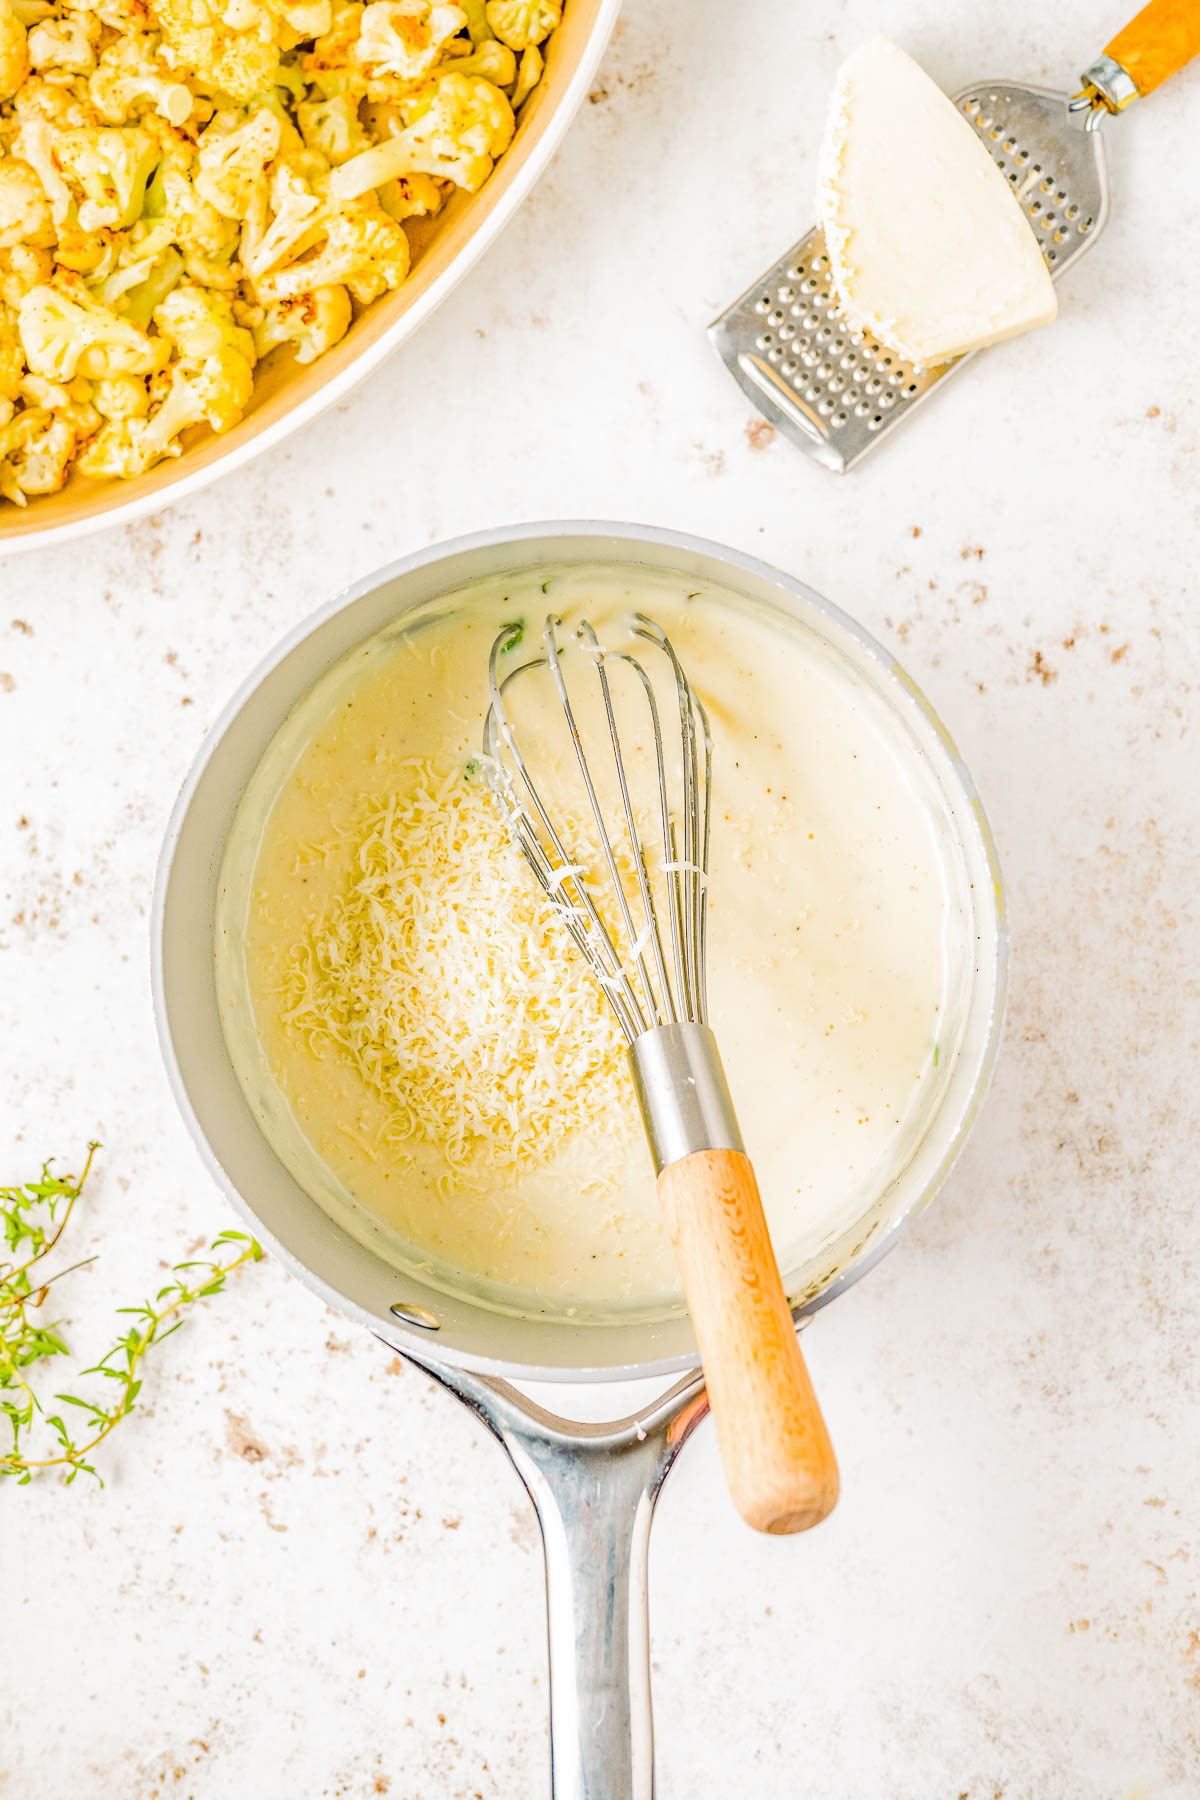 Cheesy Cauliflower Gratin — Cauliflower florets are coated in a creamy cheese sauce and sprinkled with a crispy panko breadcrumb topping before being baked to golden, bubbly perfection! This is an EASY yet ELEGANT side dish that’s perfect for busy weeknights and holiday meals alike including Thanksgiving, Christmas, or New Year's Eve!